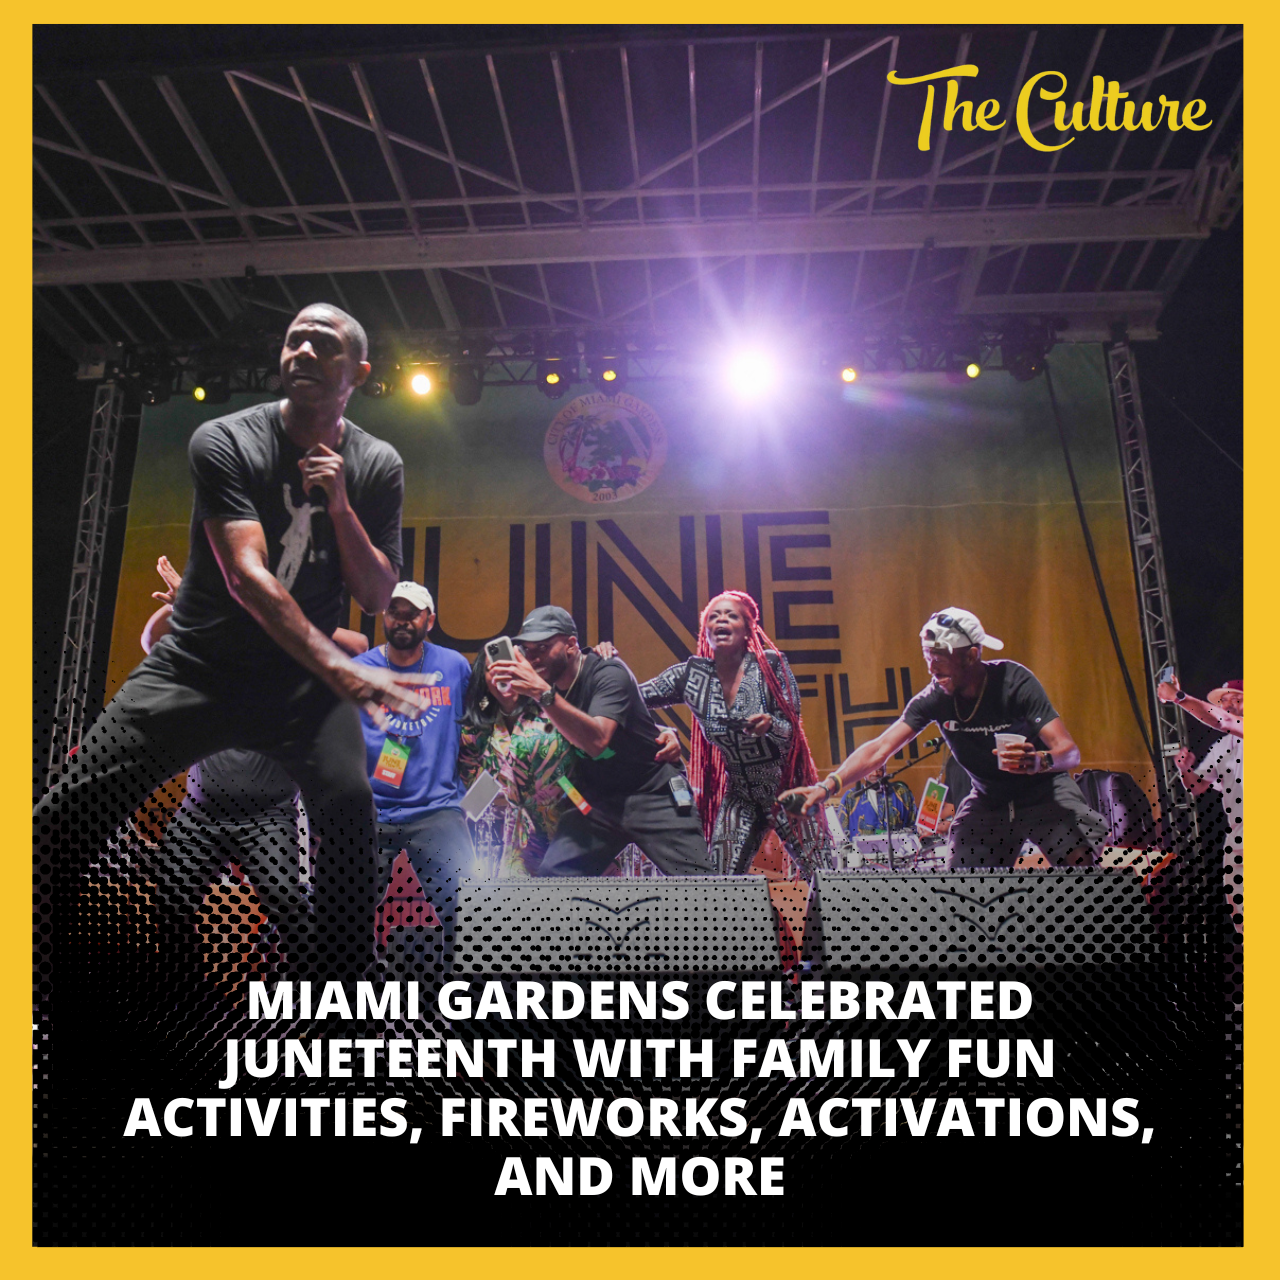 MIAMI GARDENS CELEBRATED WITH FAMILY FUN ACTIVITIES